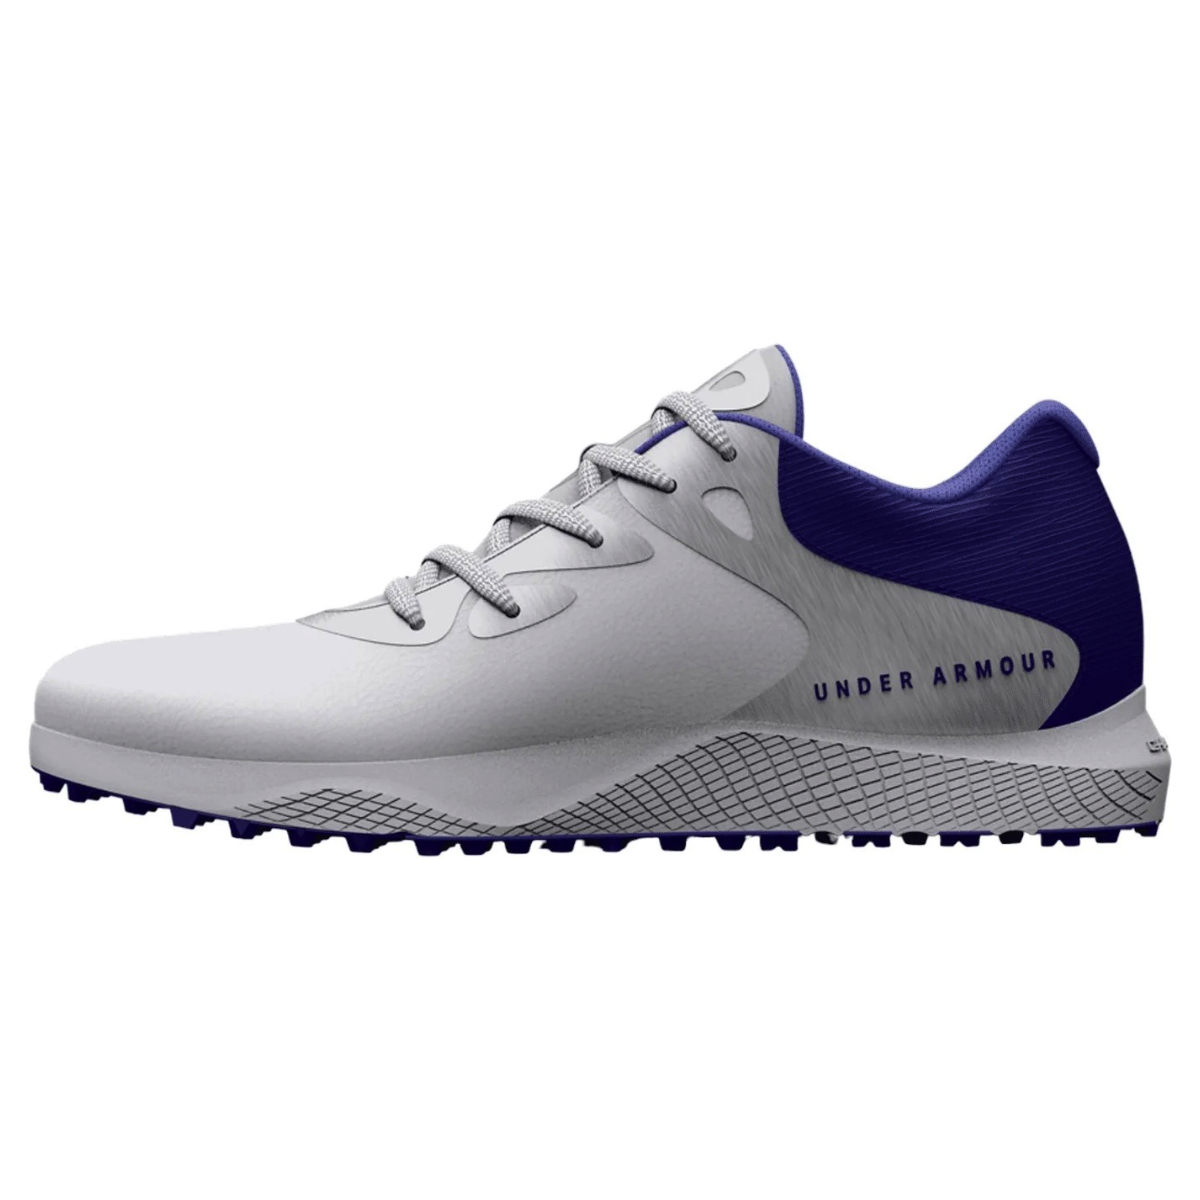 Under Armour Charged Breathe 2 SL White/Silver Damen